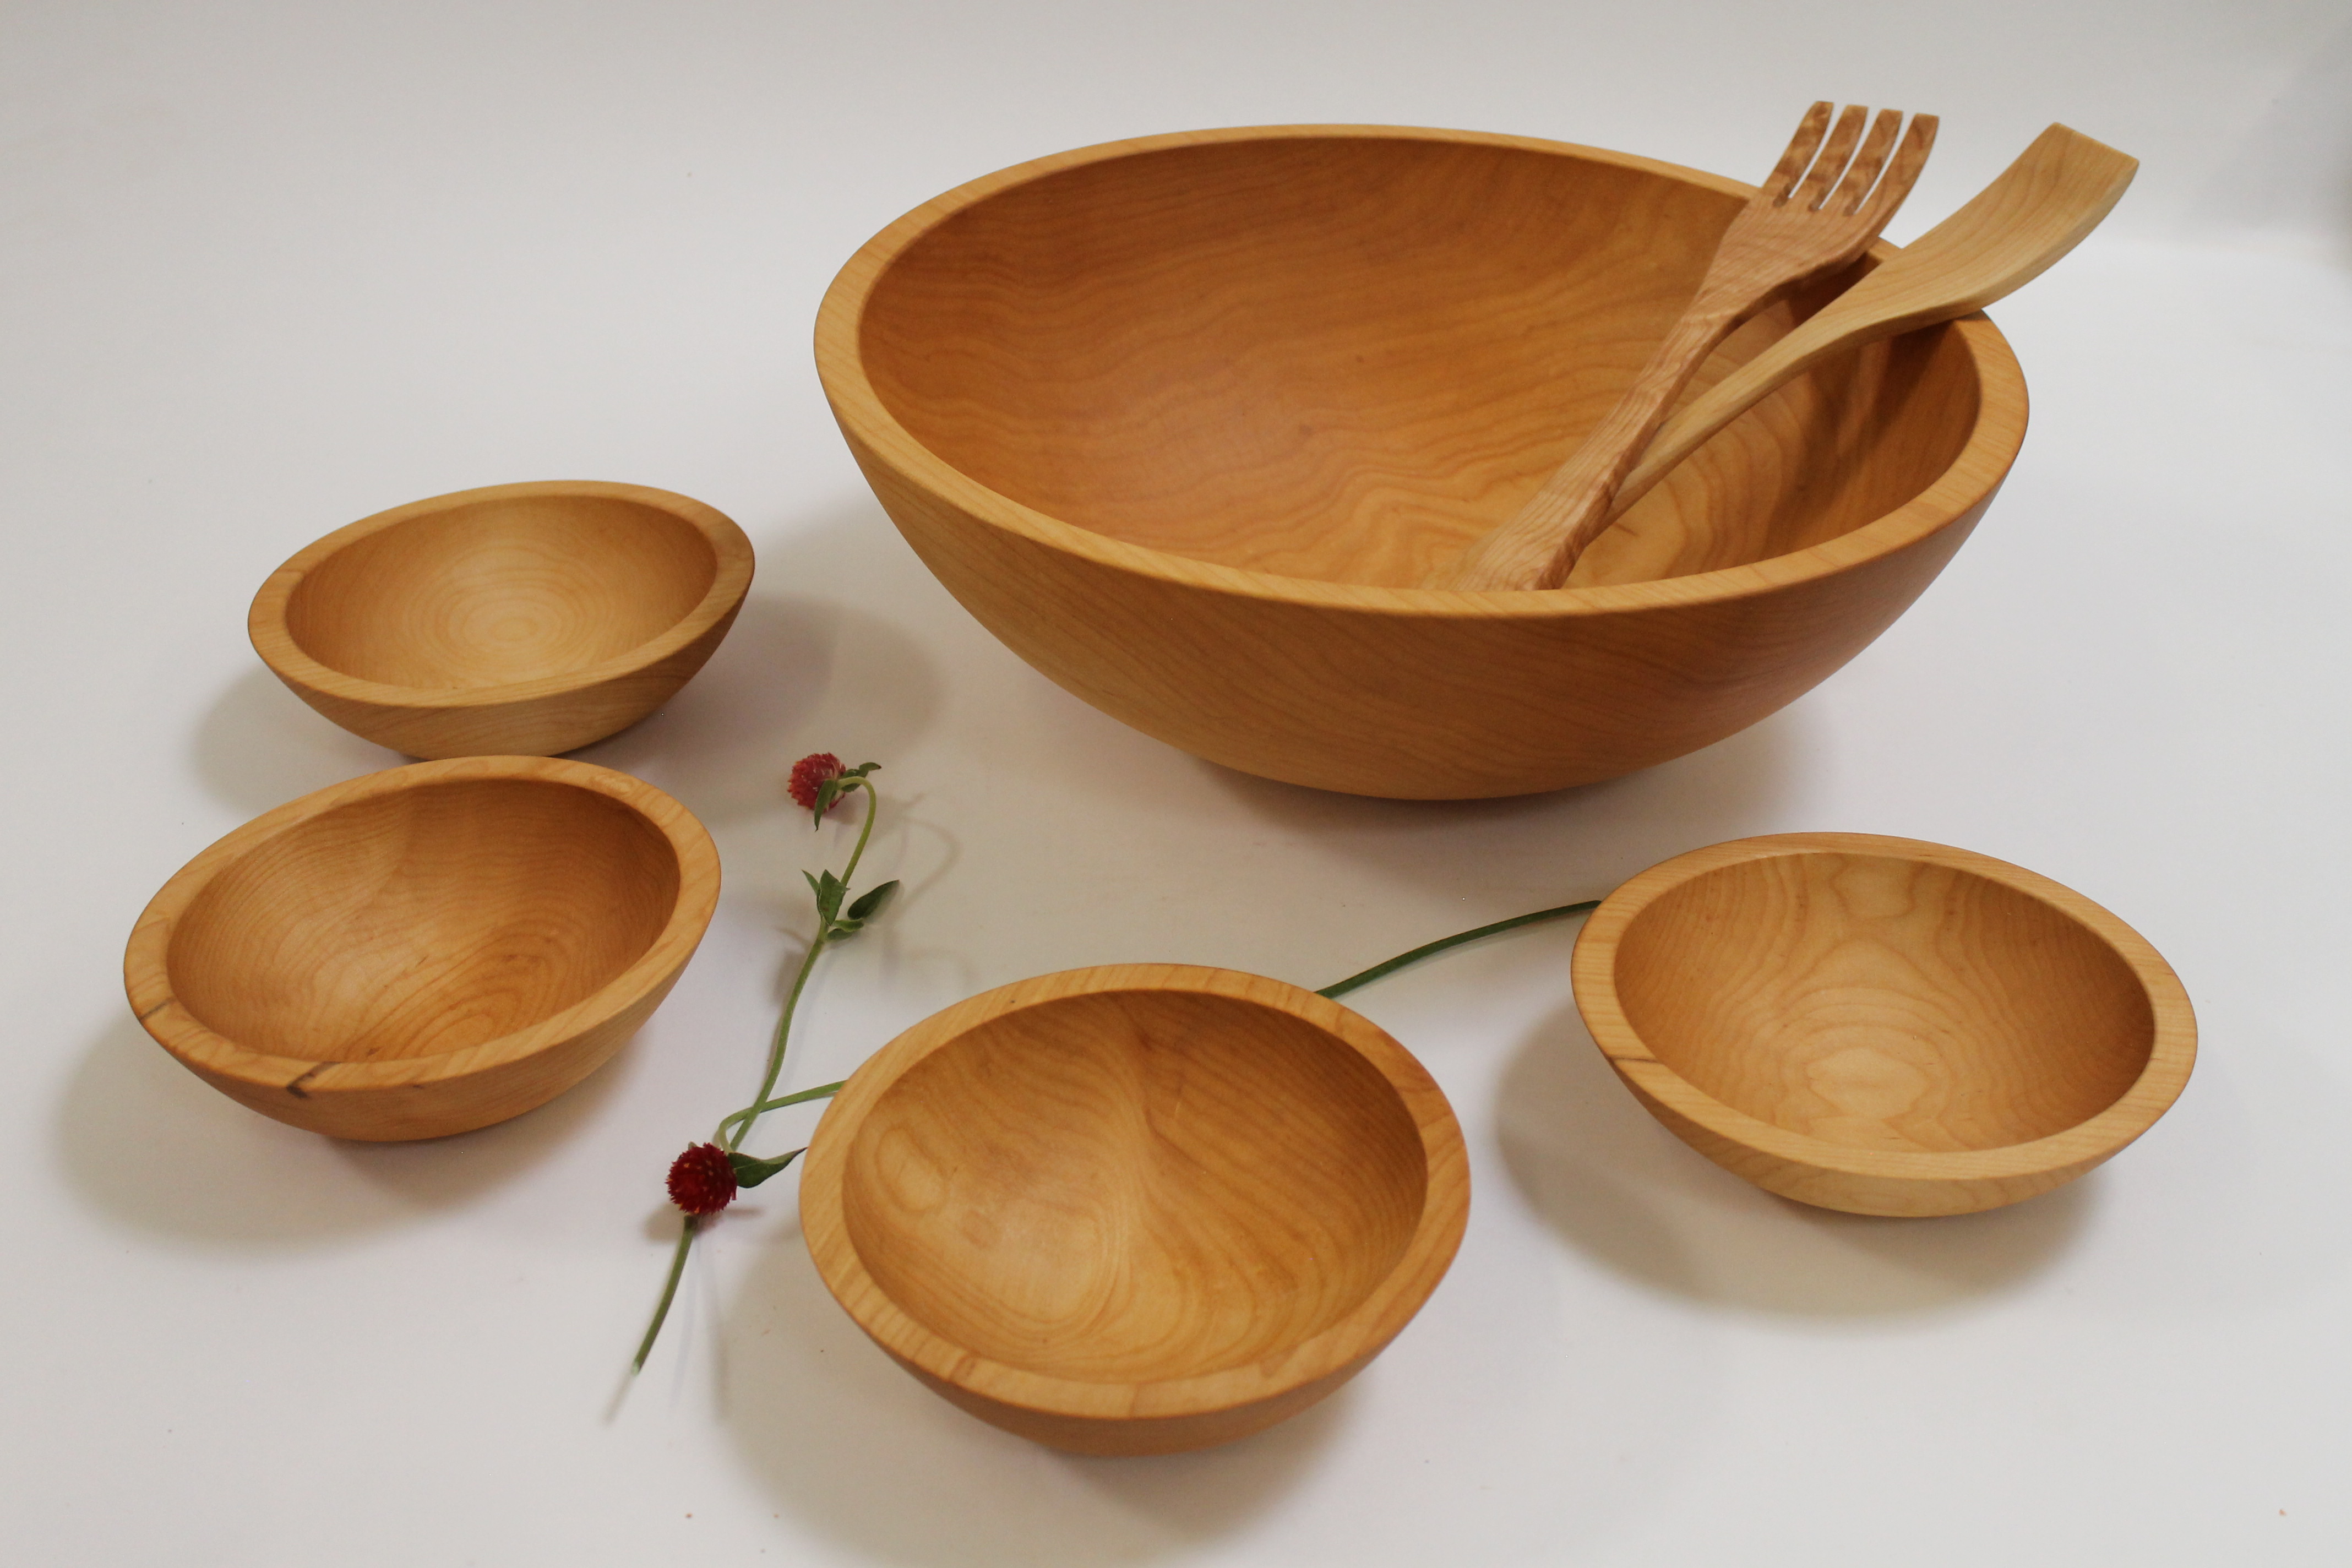 Our bowl sets make a great wedding gift idea.